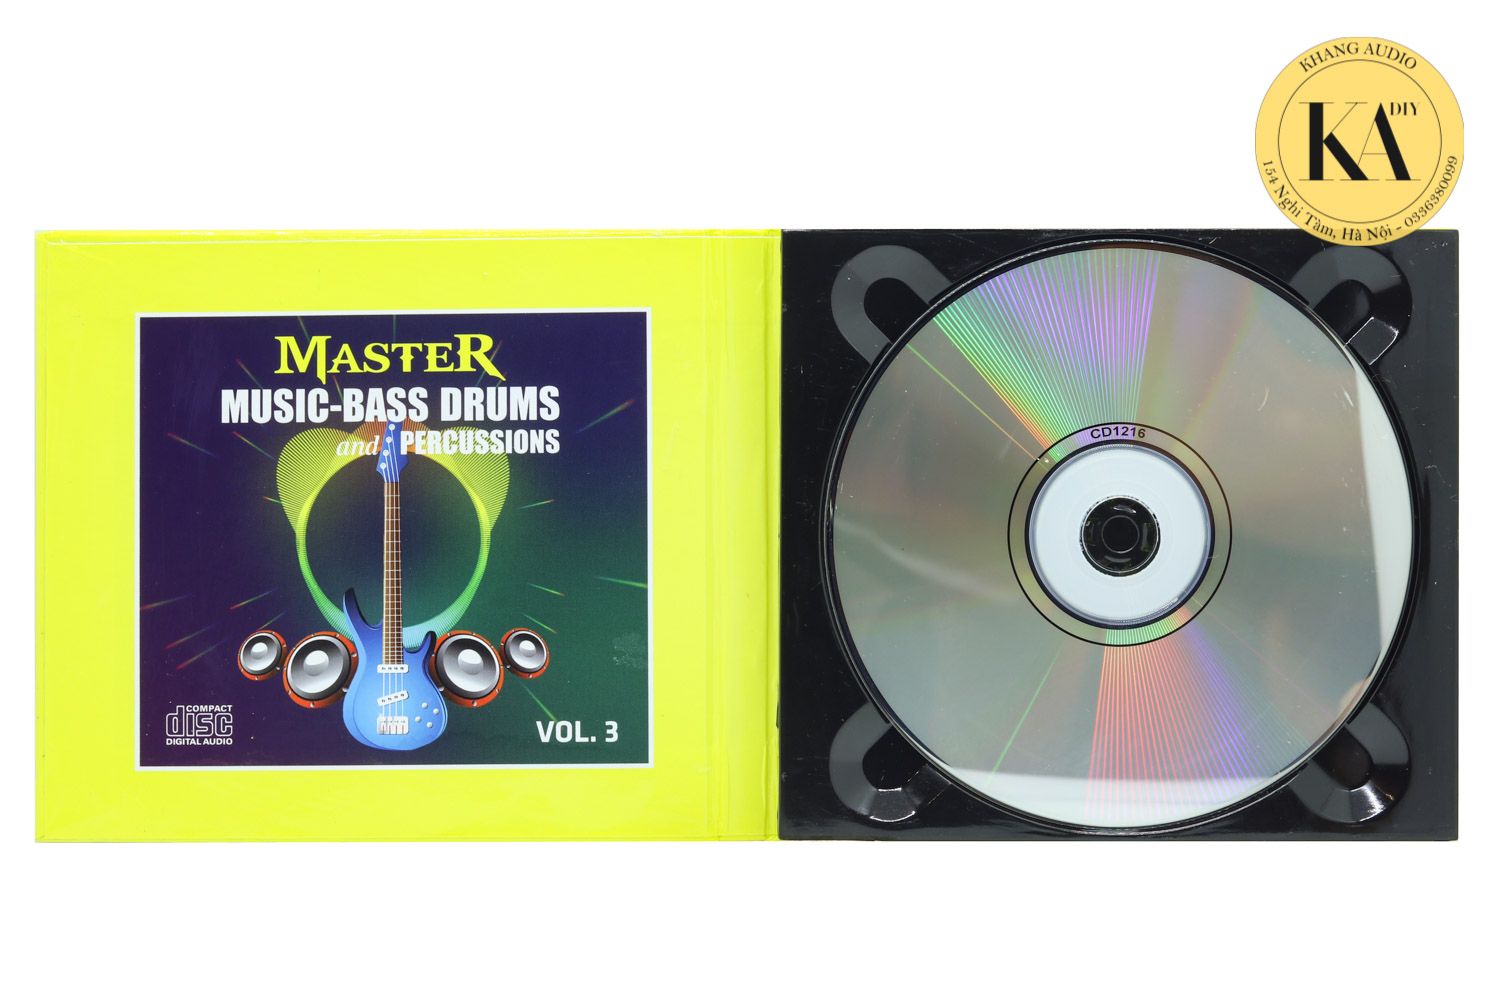 Master Music - Bass Drums and Percussions Vol.3 Khang Audio 0336380099